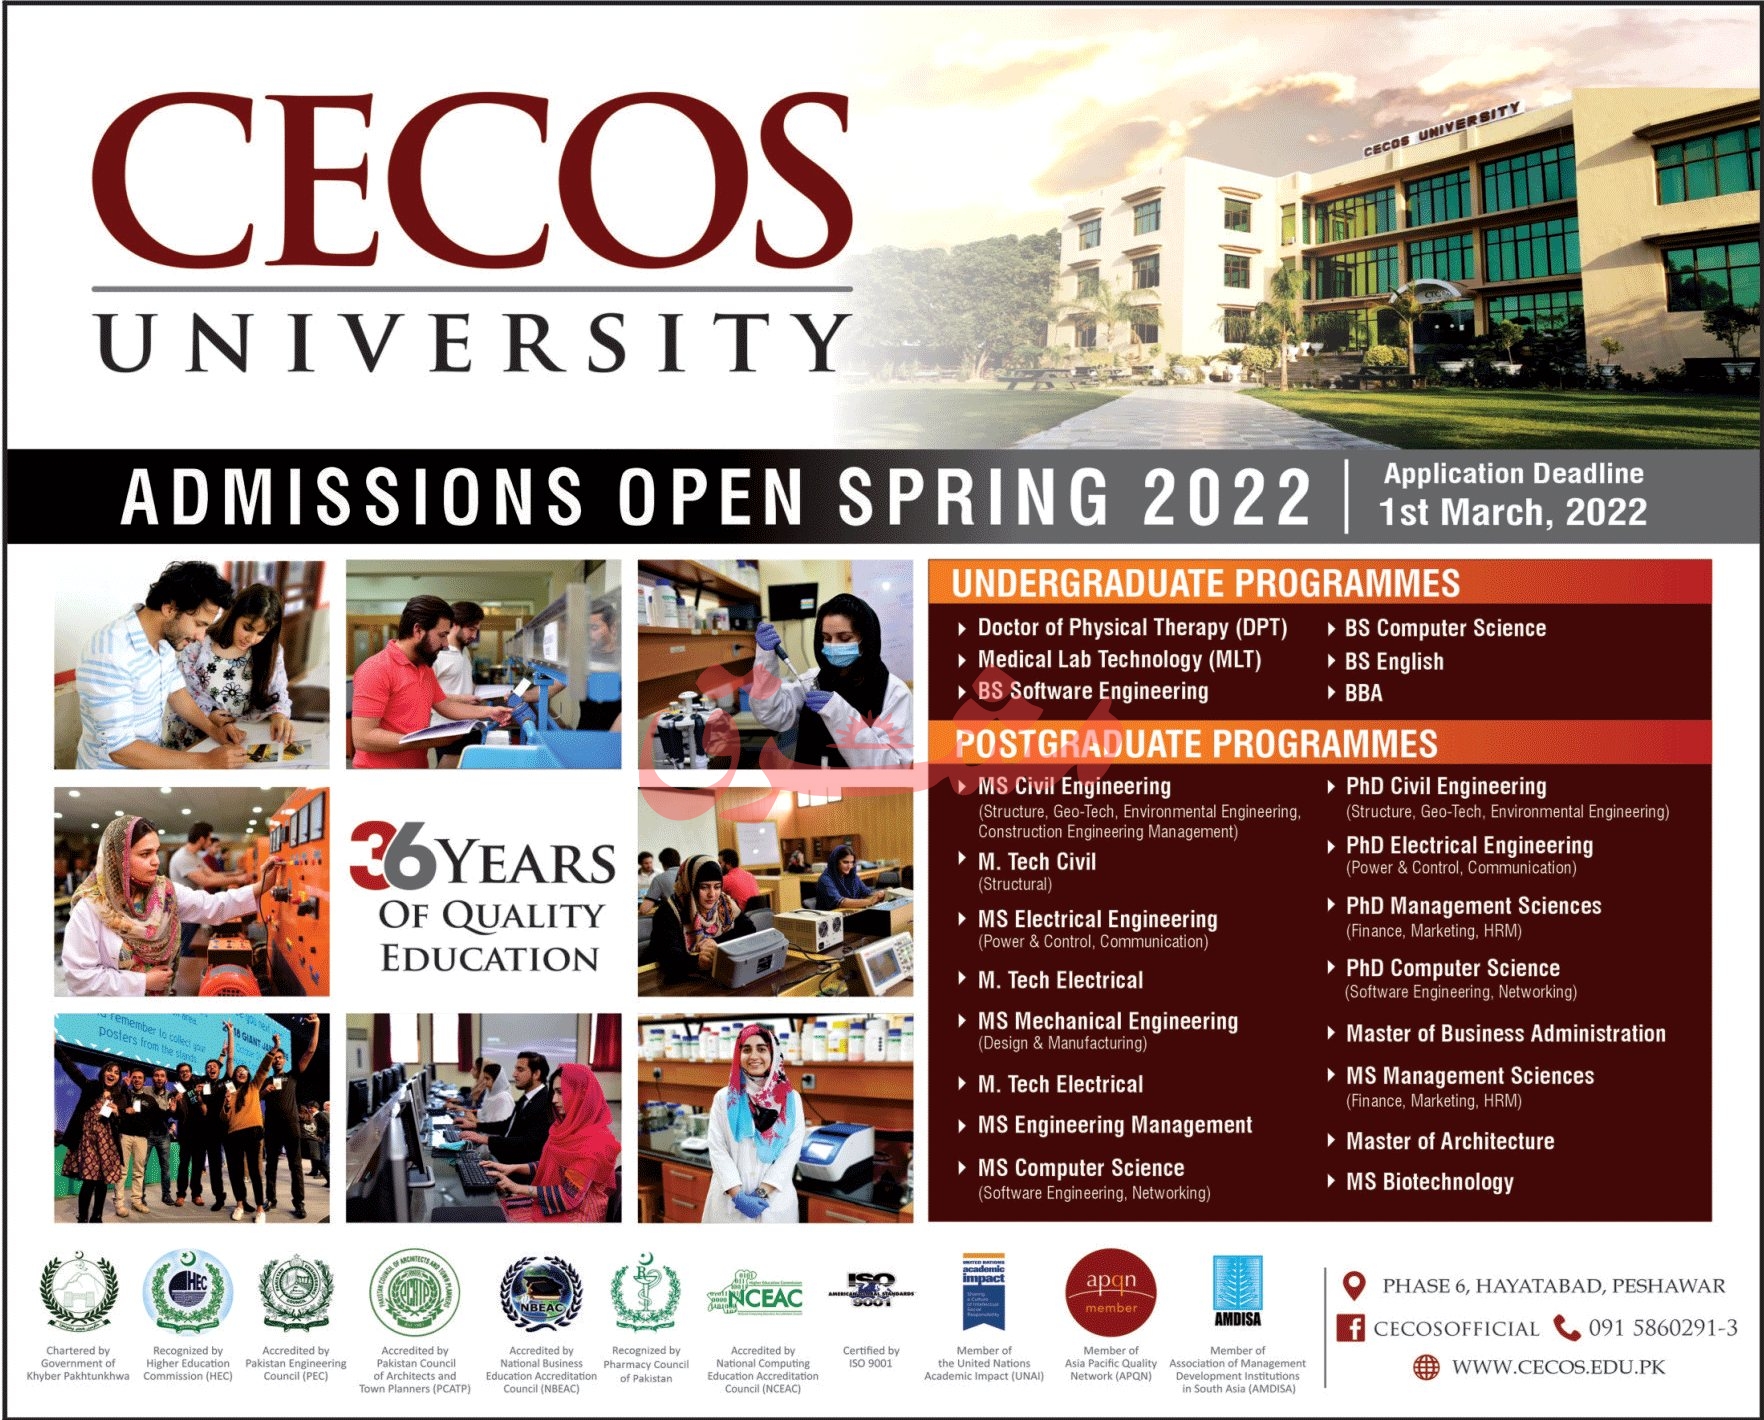 Cecos University Admission 2022, Last Date, Entry Test Result